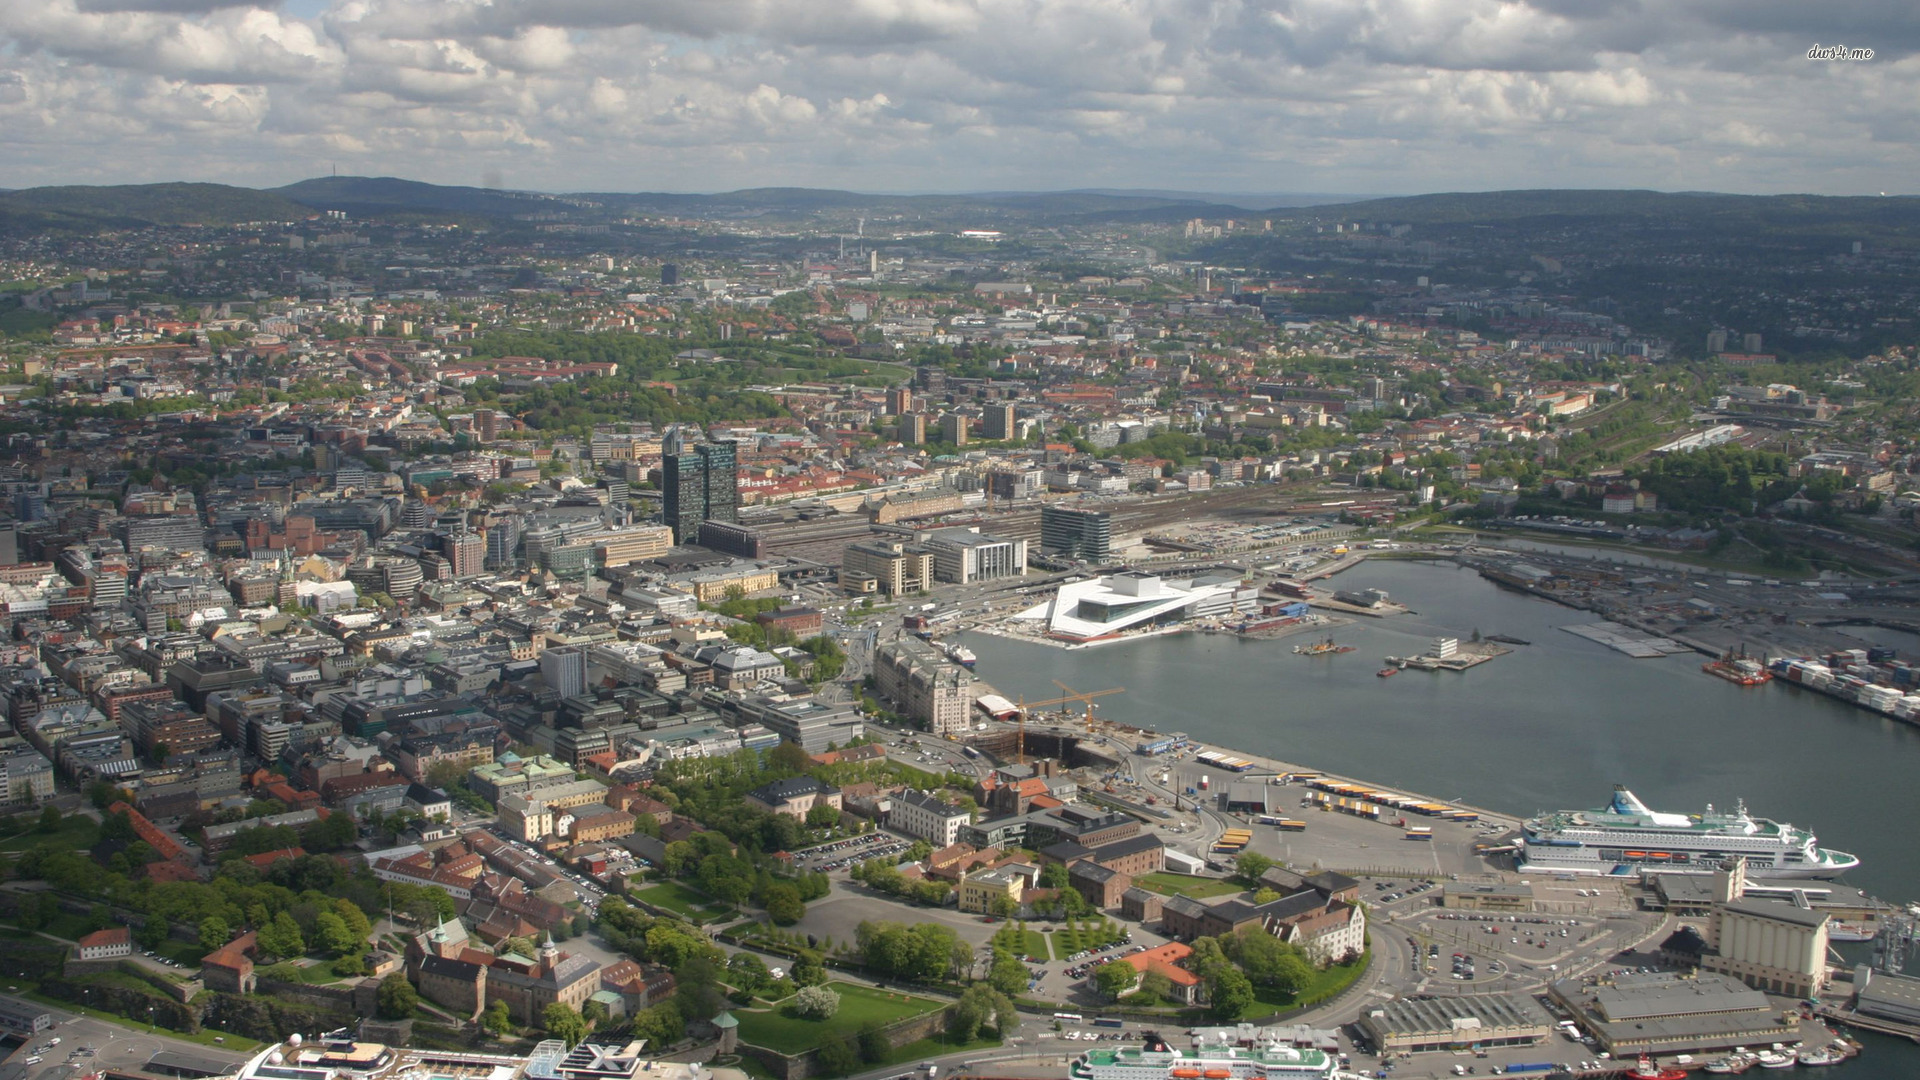 The City Of Oslo Wallpaper And Image Pictures Photos